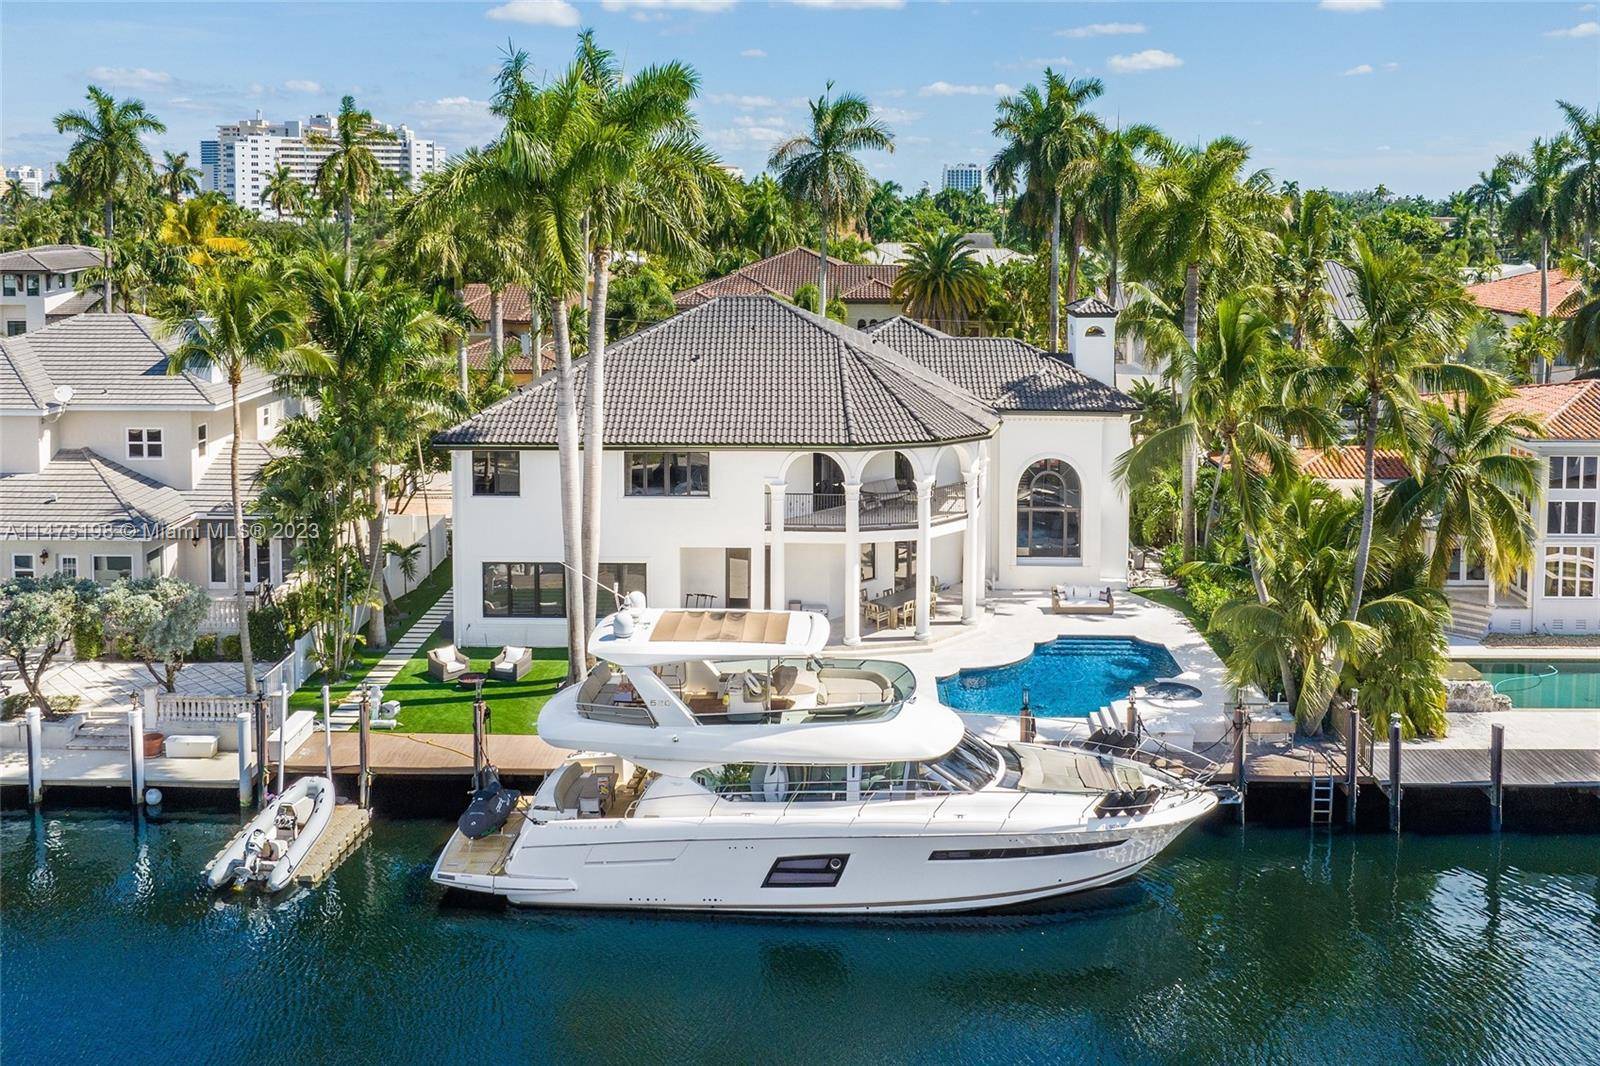 Welcome to this sophisticated and fully renovated waterfront estate, boasting 100 feet of deep water frontage that is sure to take your breath away !